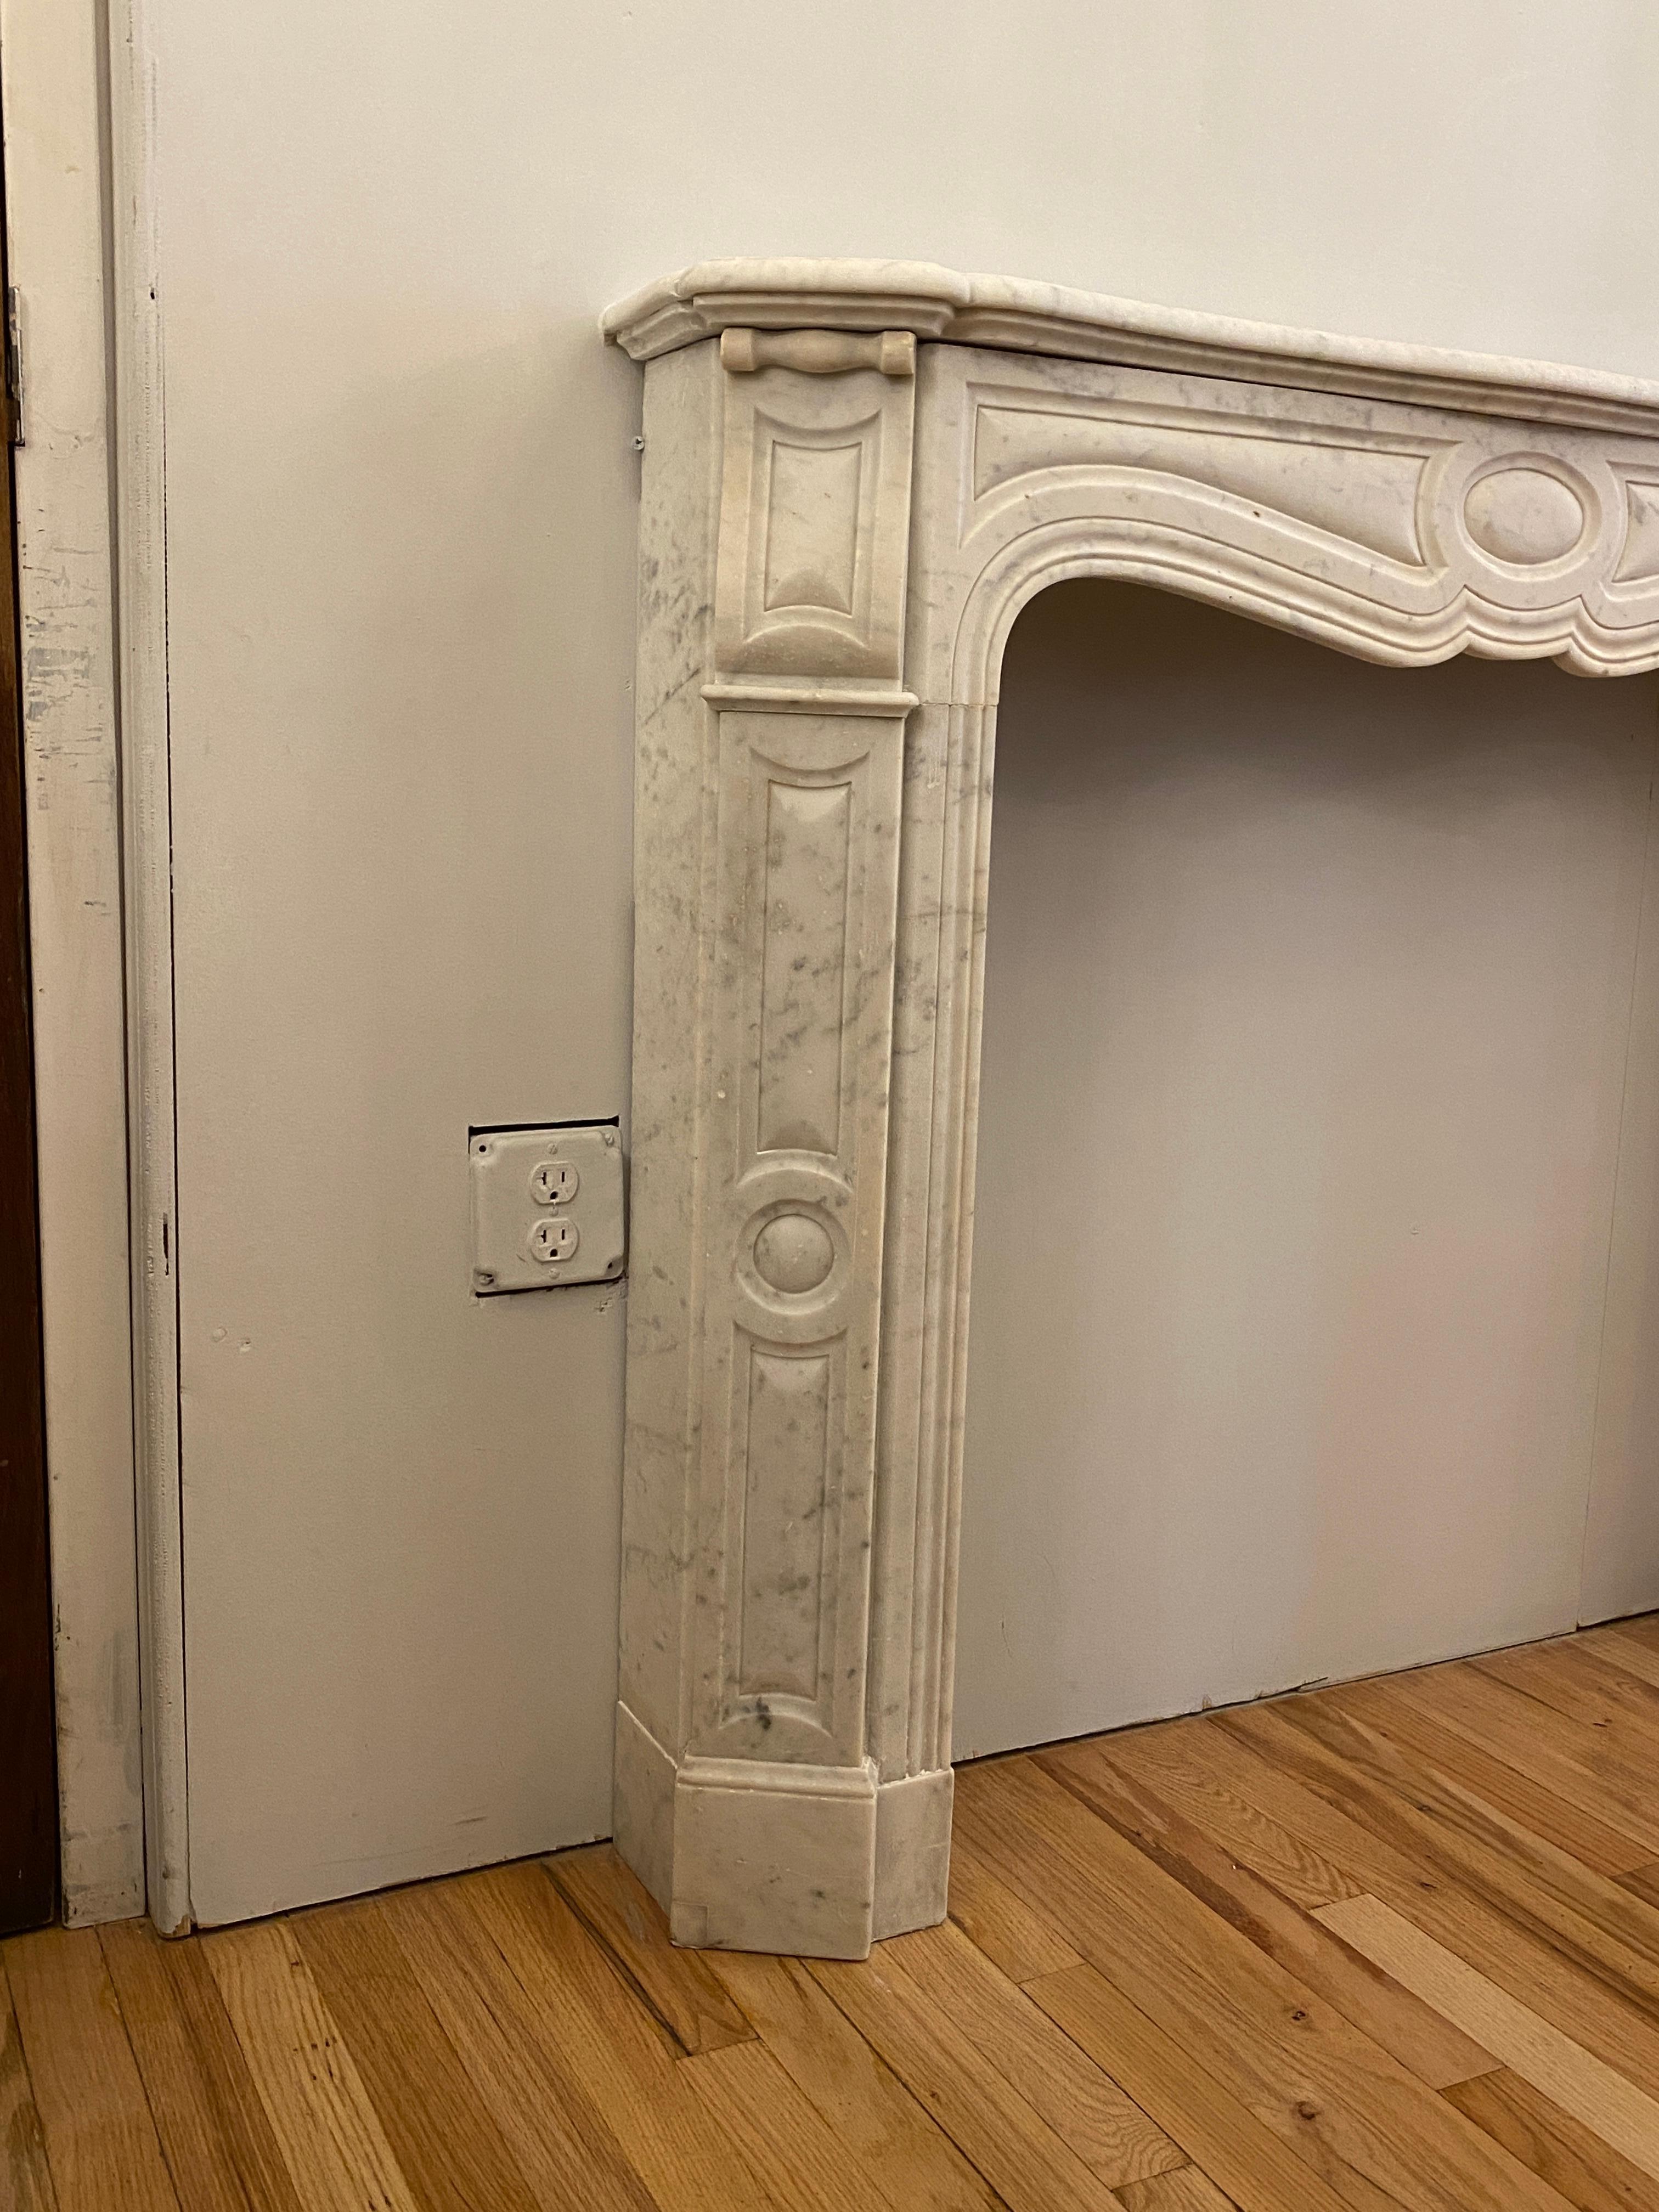 Early 20th Century 1910s Petite French White Carrara Marble Mantel from West 9th St in Manhattan